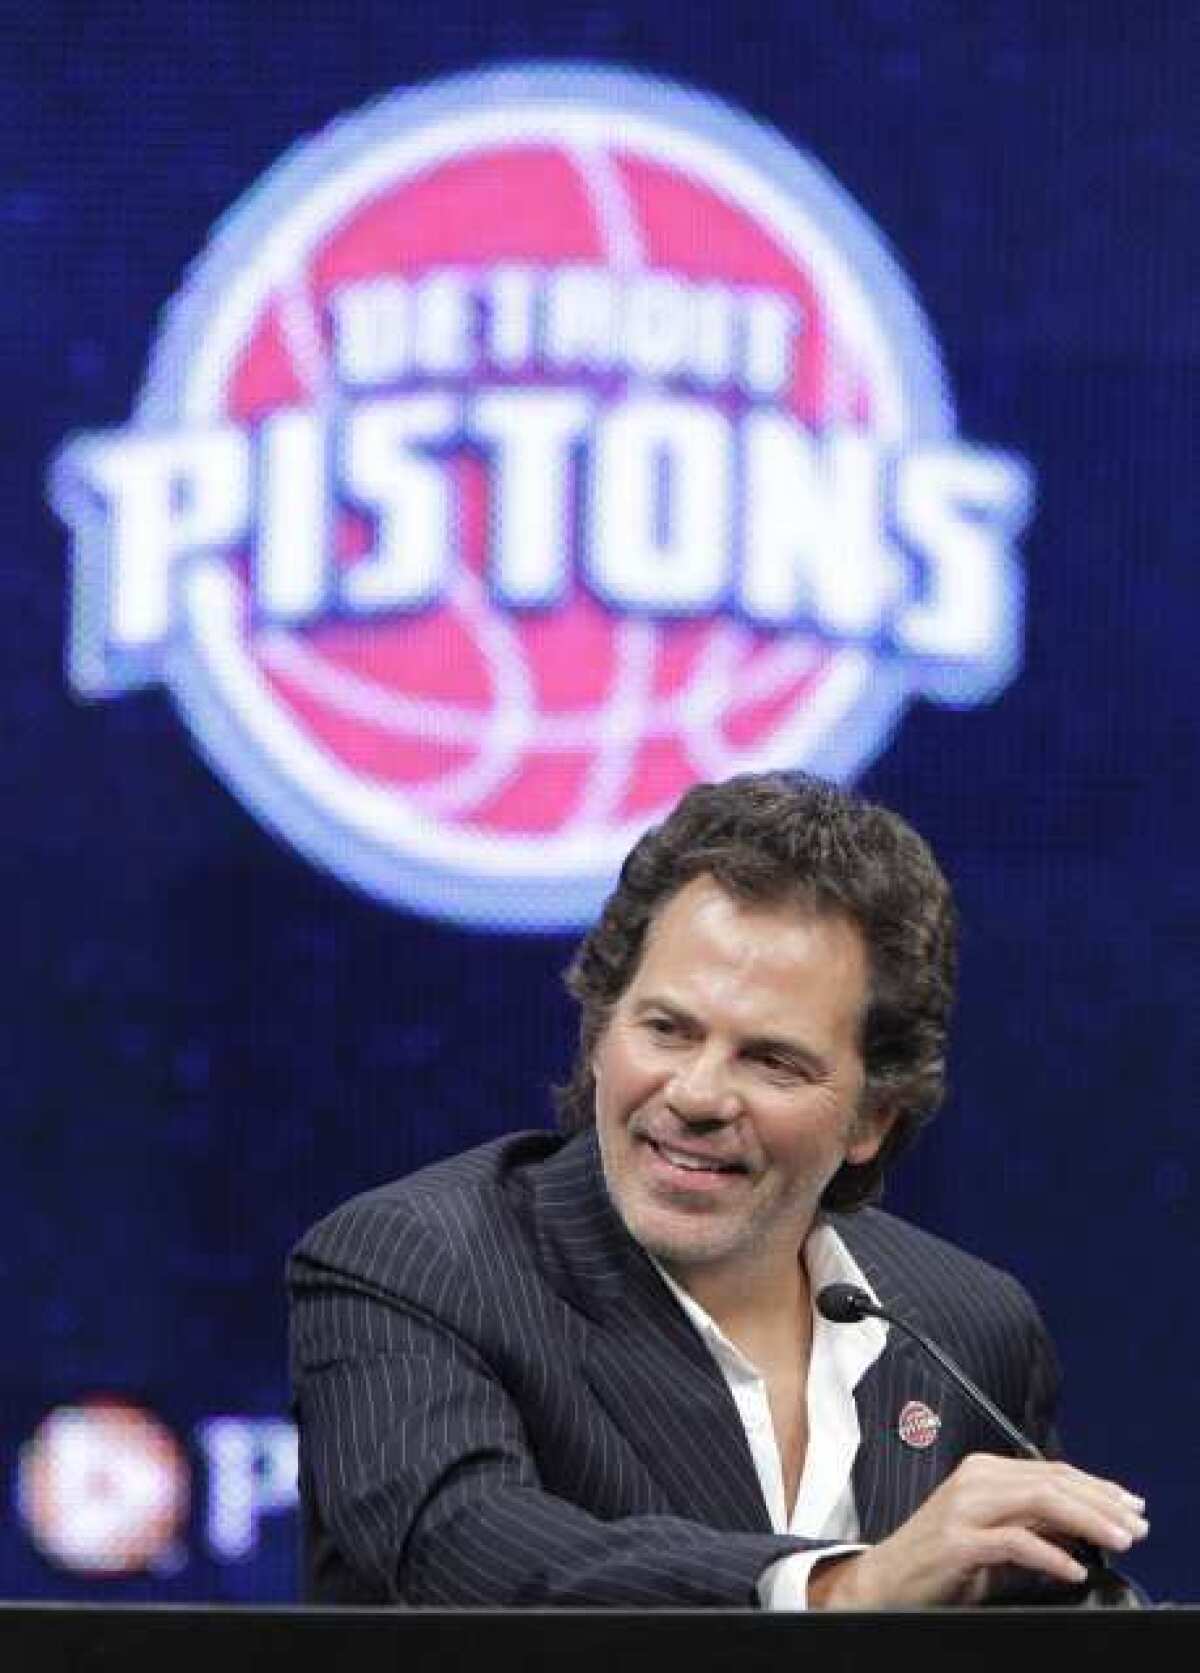 Tom Gores, founder of Platinum Equity and owner of the Detroit Pistons, addresses the media in Auburn Hills, Mich.